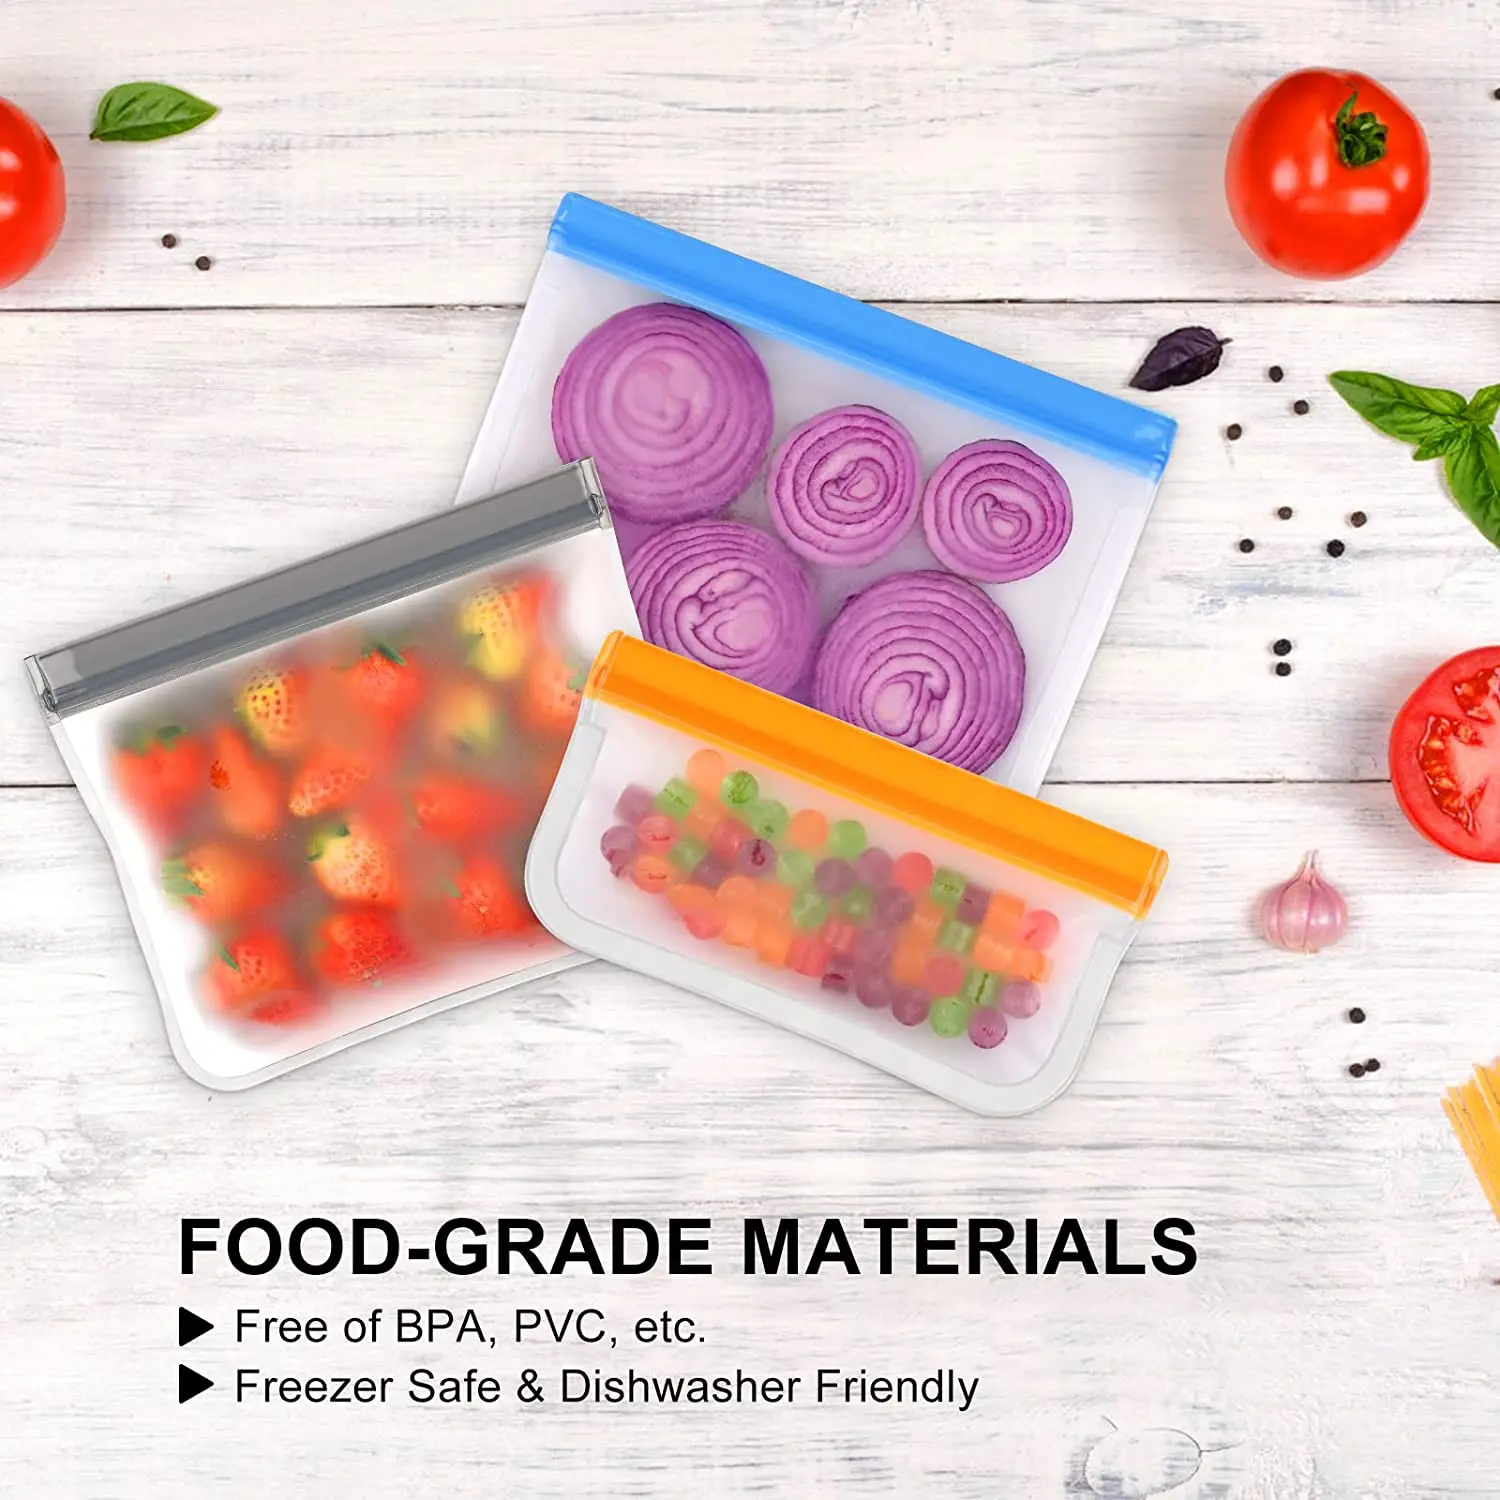 https://ae01.alicdn.com/kf/Sc191d9917c62403ead4d1eee088af9aaO/BPA-Free-Reusable-Food-Storage-Bags-Freezer-Silicone-Bag-for-Veggies-Fruit-Meat-Lunch.jpg